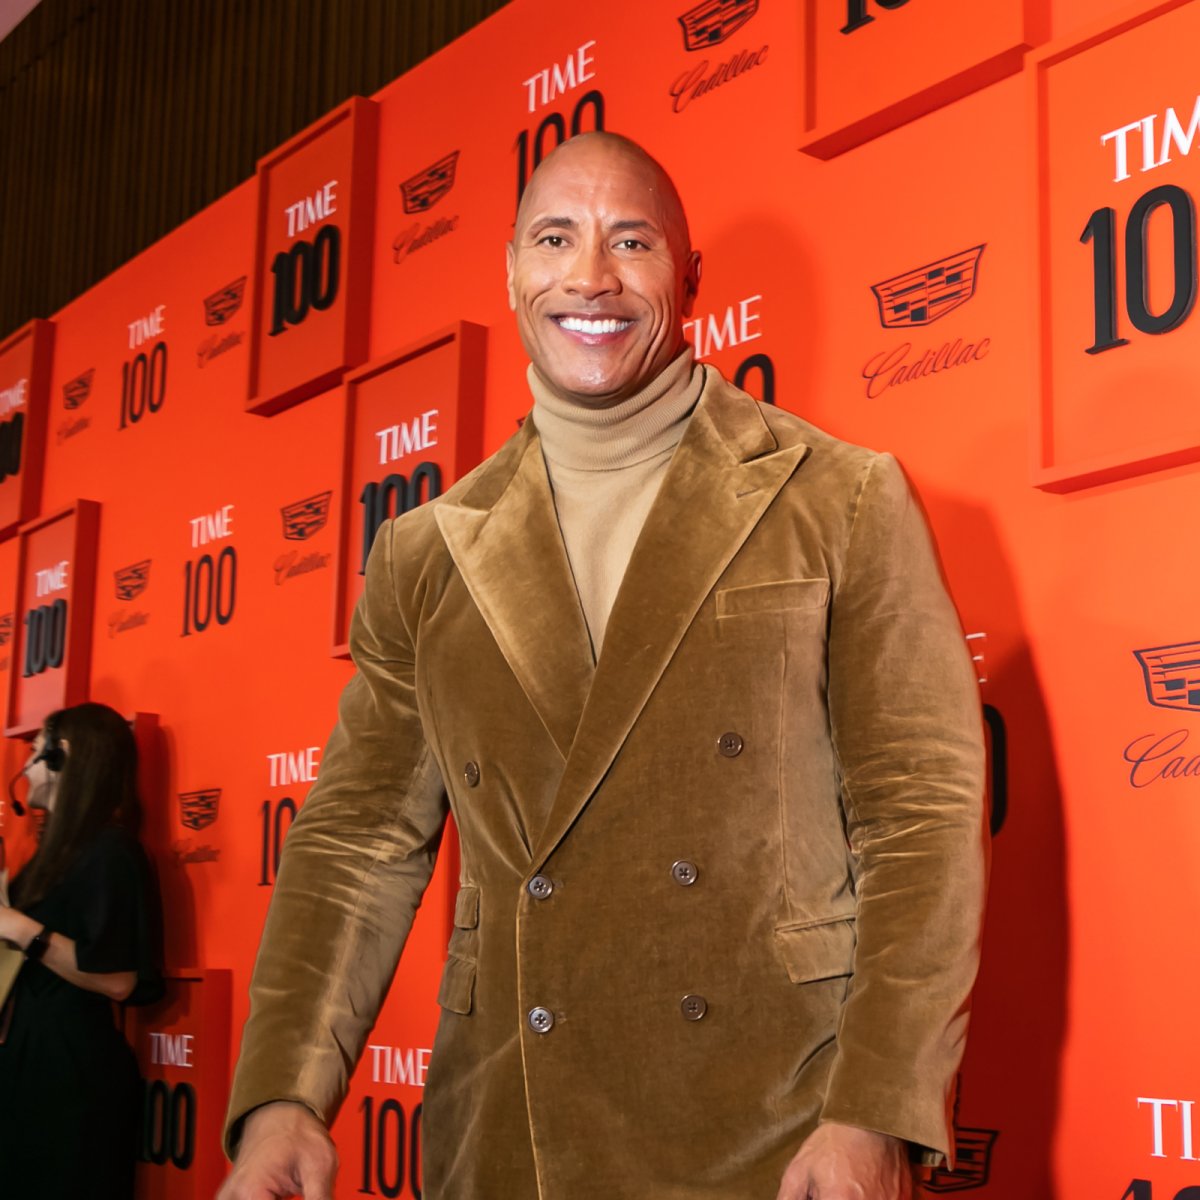 Dwayne the Rock Johnson at the Time 100 Gala at Jazz at Lincoln Center in New York City on April 23, 2019.